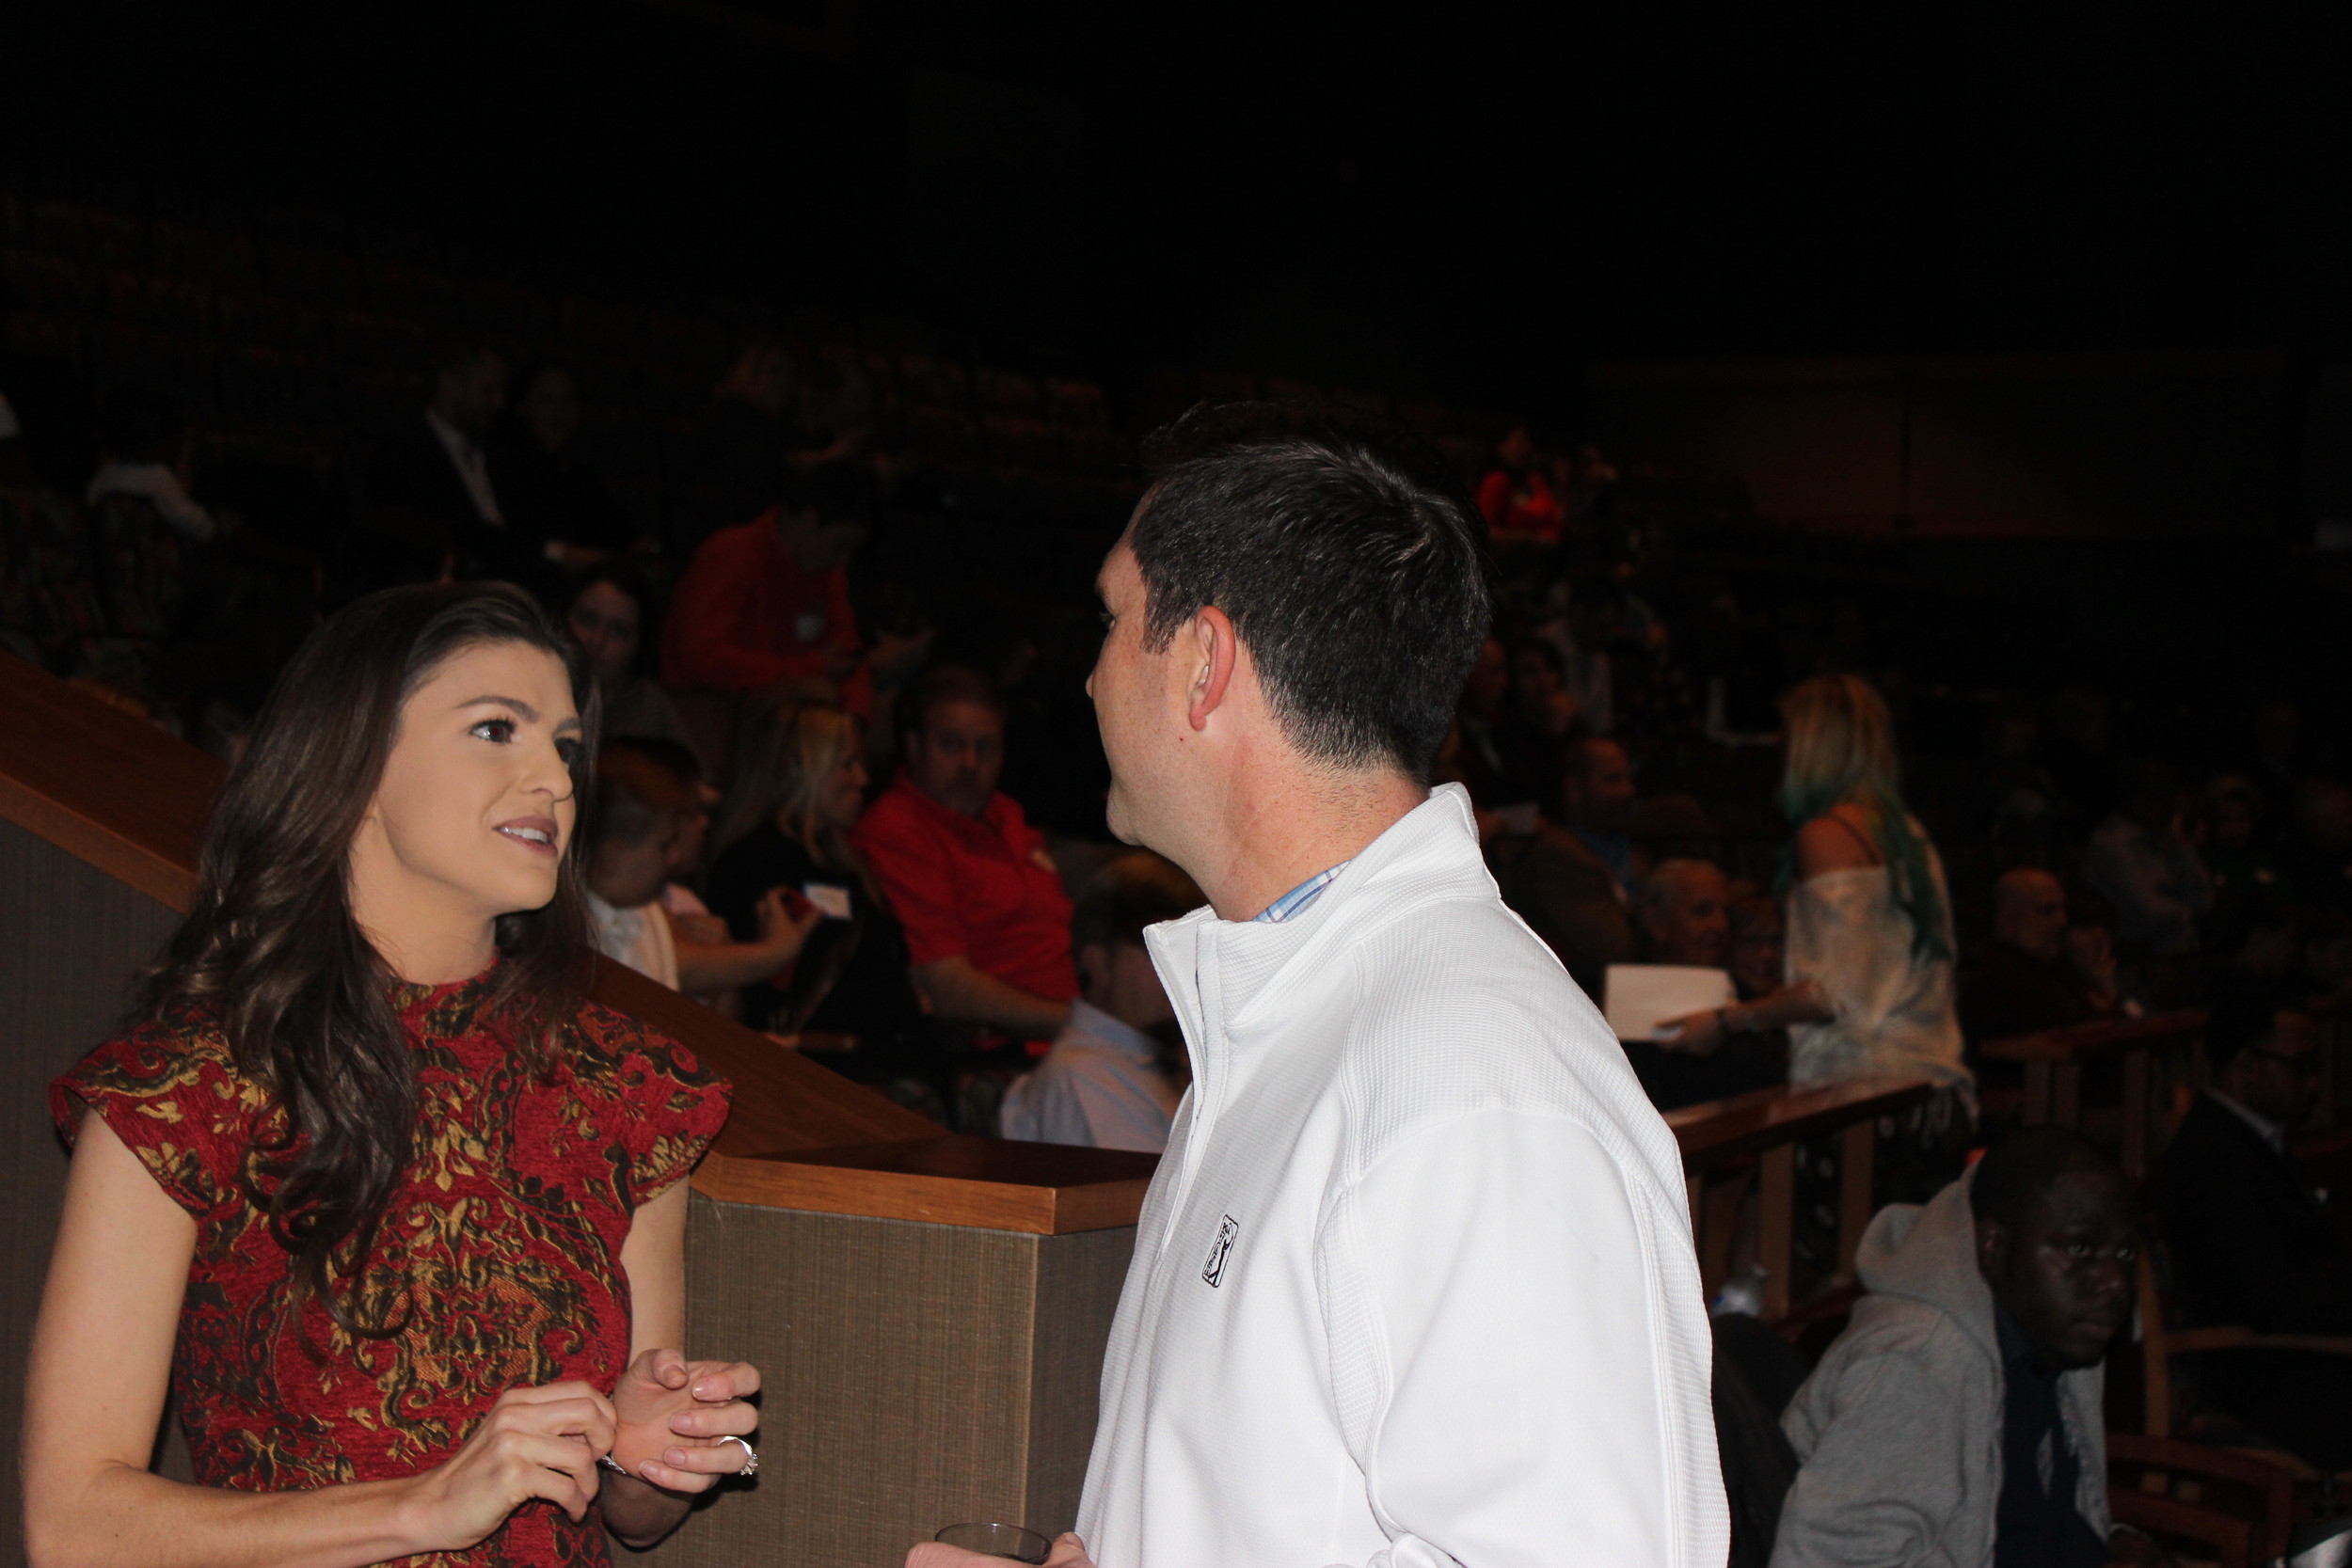 Casey DeSantis, host of First Coast Living and Executive Producer of the documentary, spoke at the reception and private screening on Jan. 15.